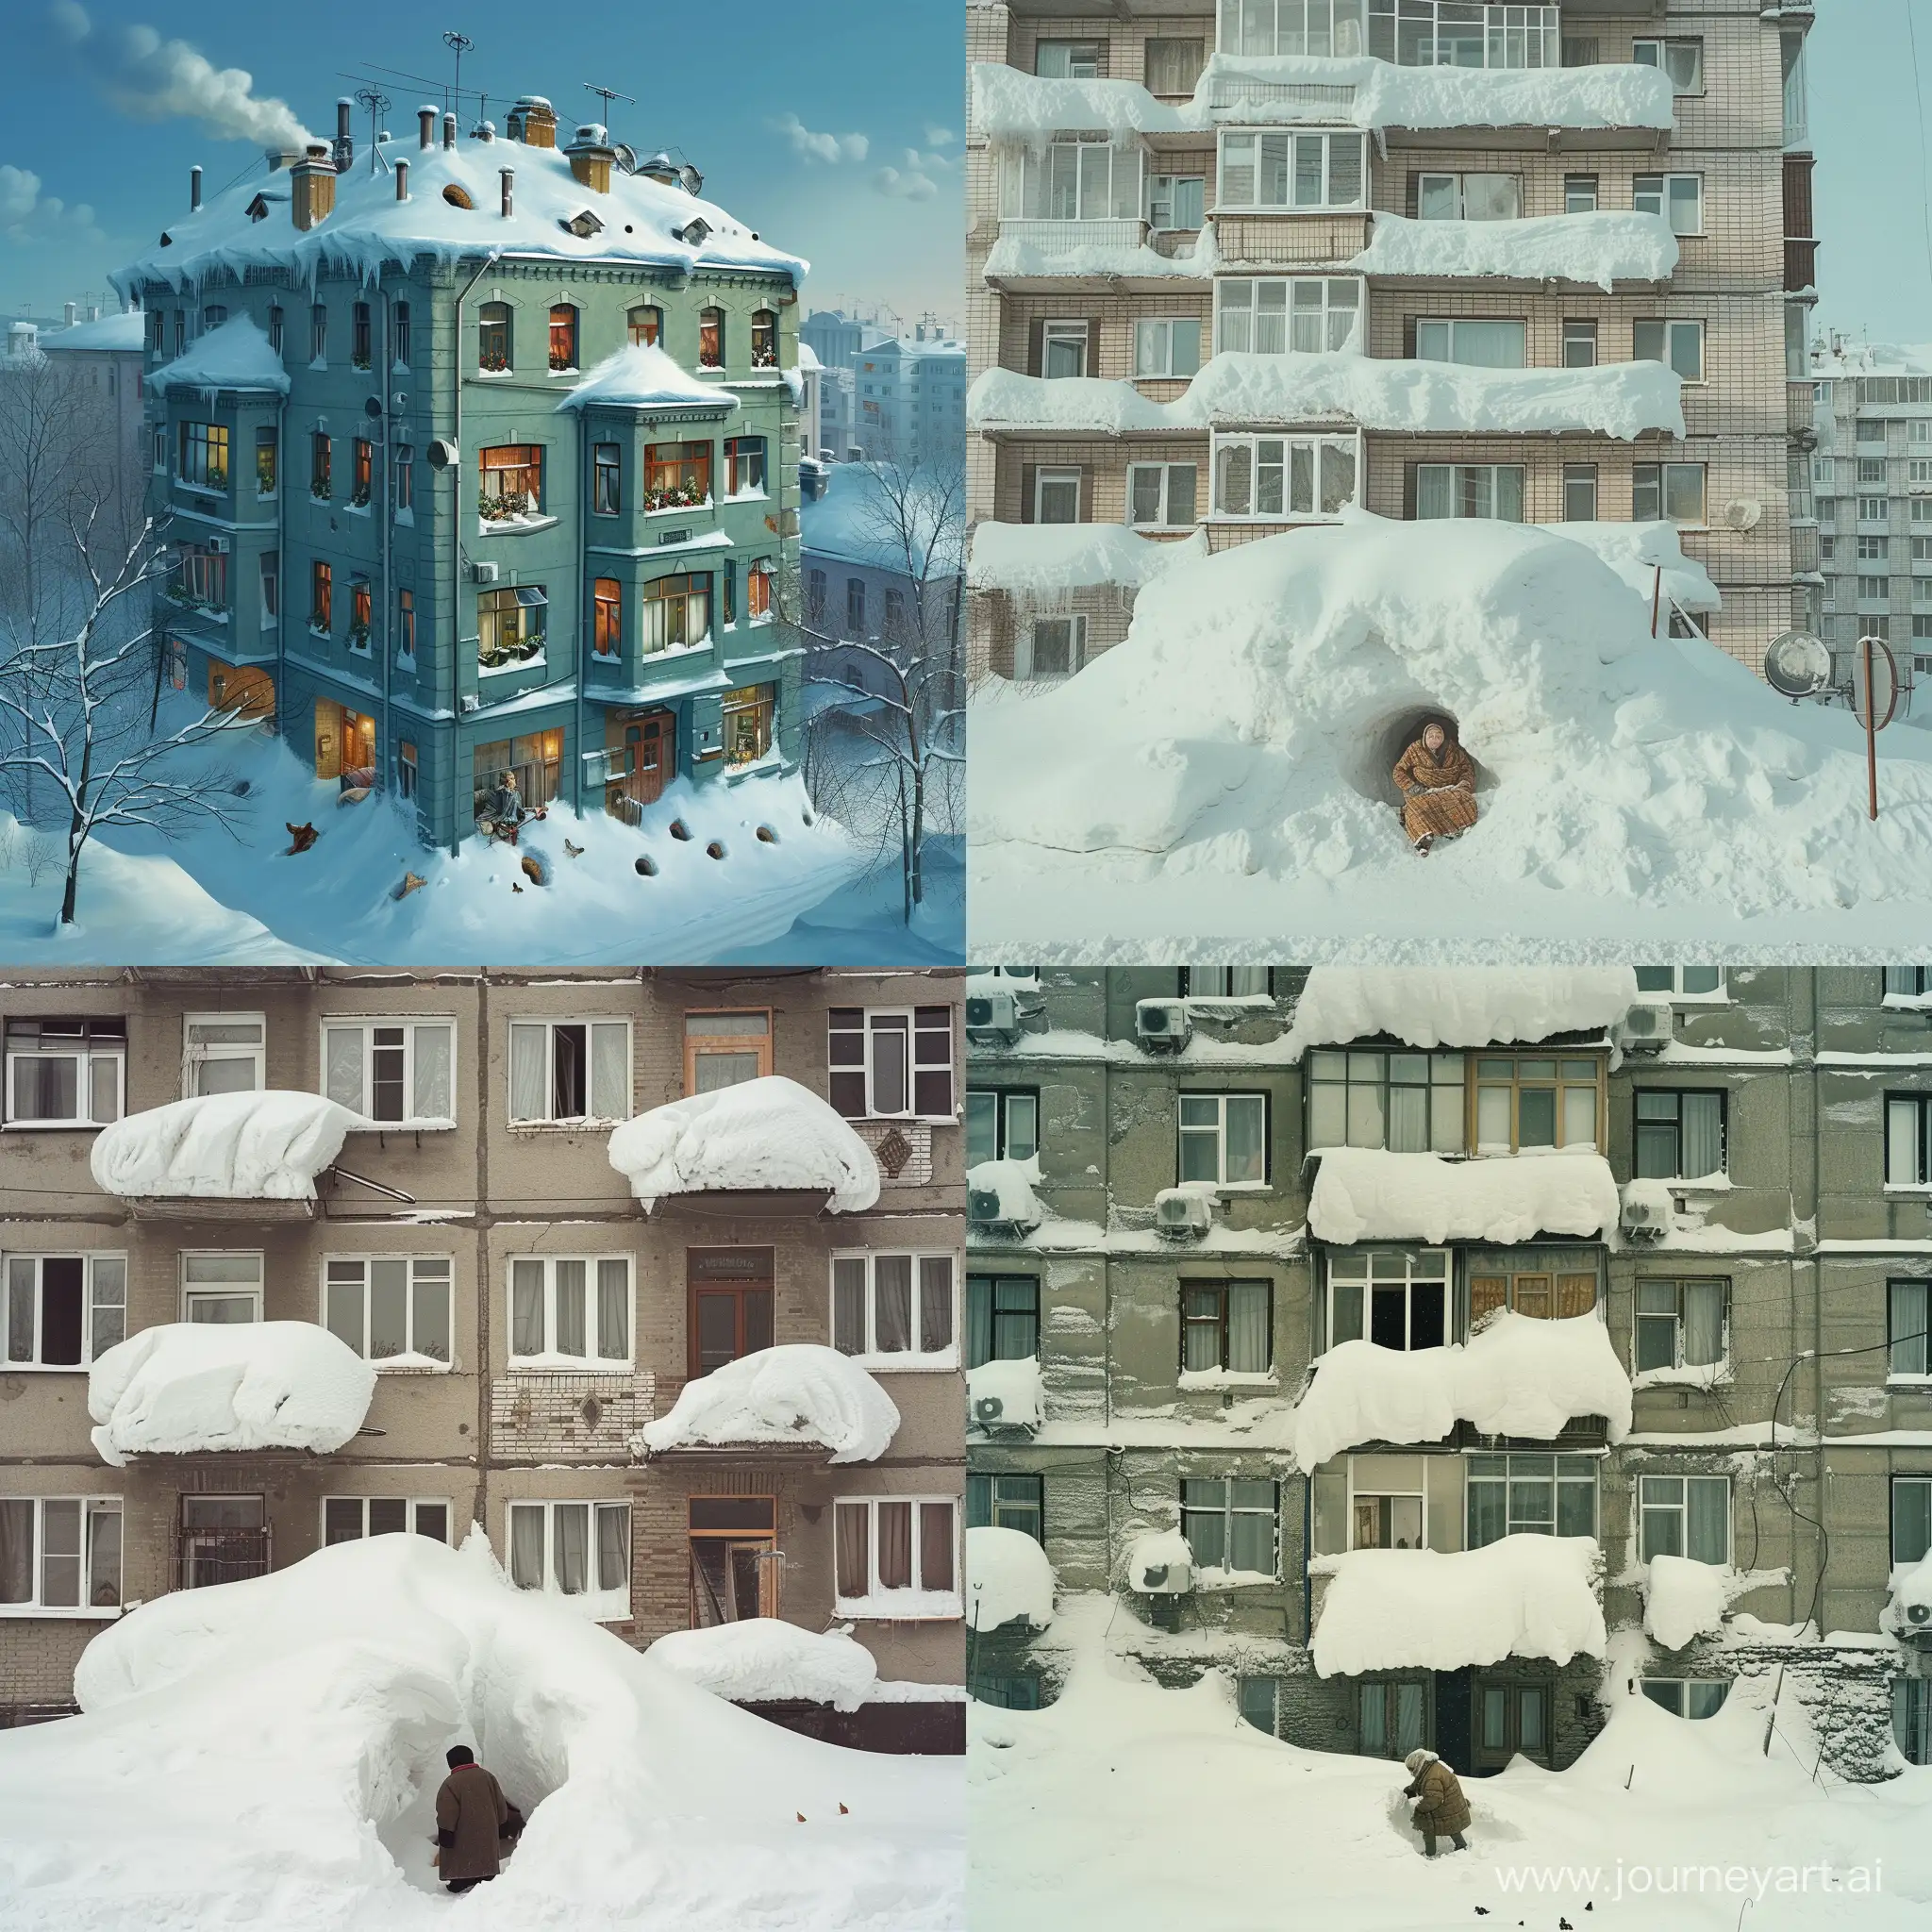 The nine-storey building was covered with snow up to the roof, the residents fell asleep for the whole winter, wrapped in a blanket. Only the grandmother does not sleep, digs holes around the house, runs briskly back and forth through them, climbs into windows, runs apartments, feeds cats. And in the evenings he sits on the roof and listens to the sound of the wind.